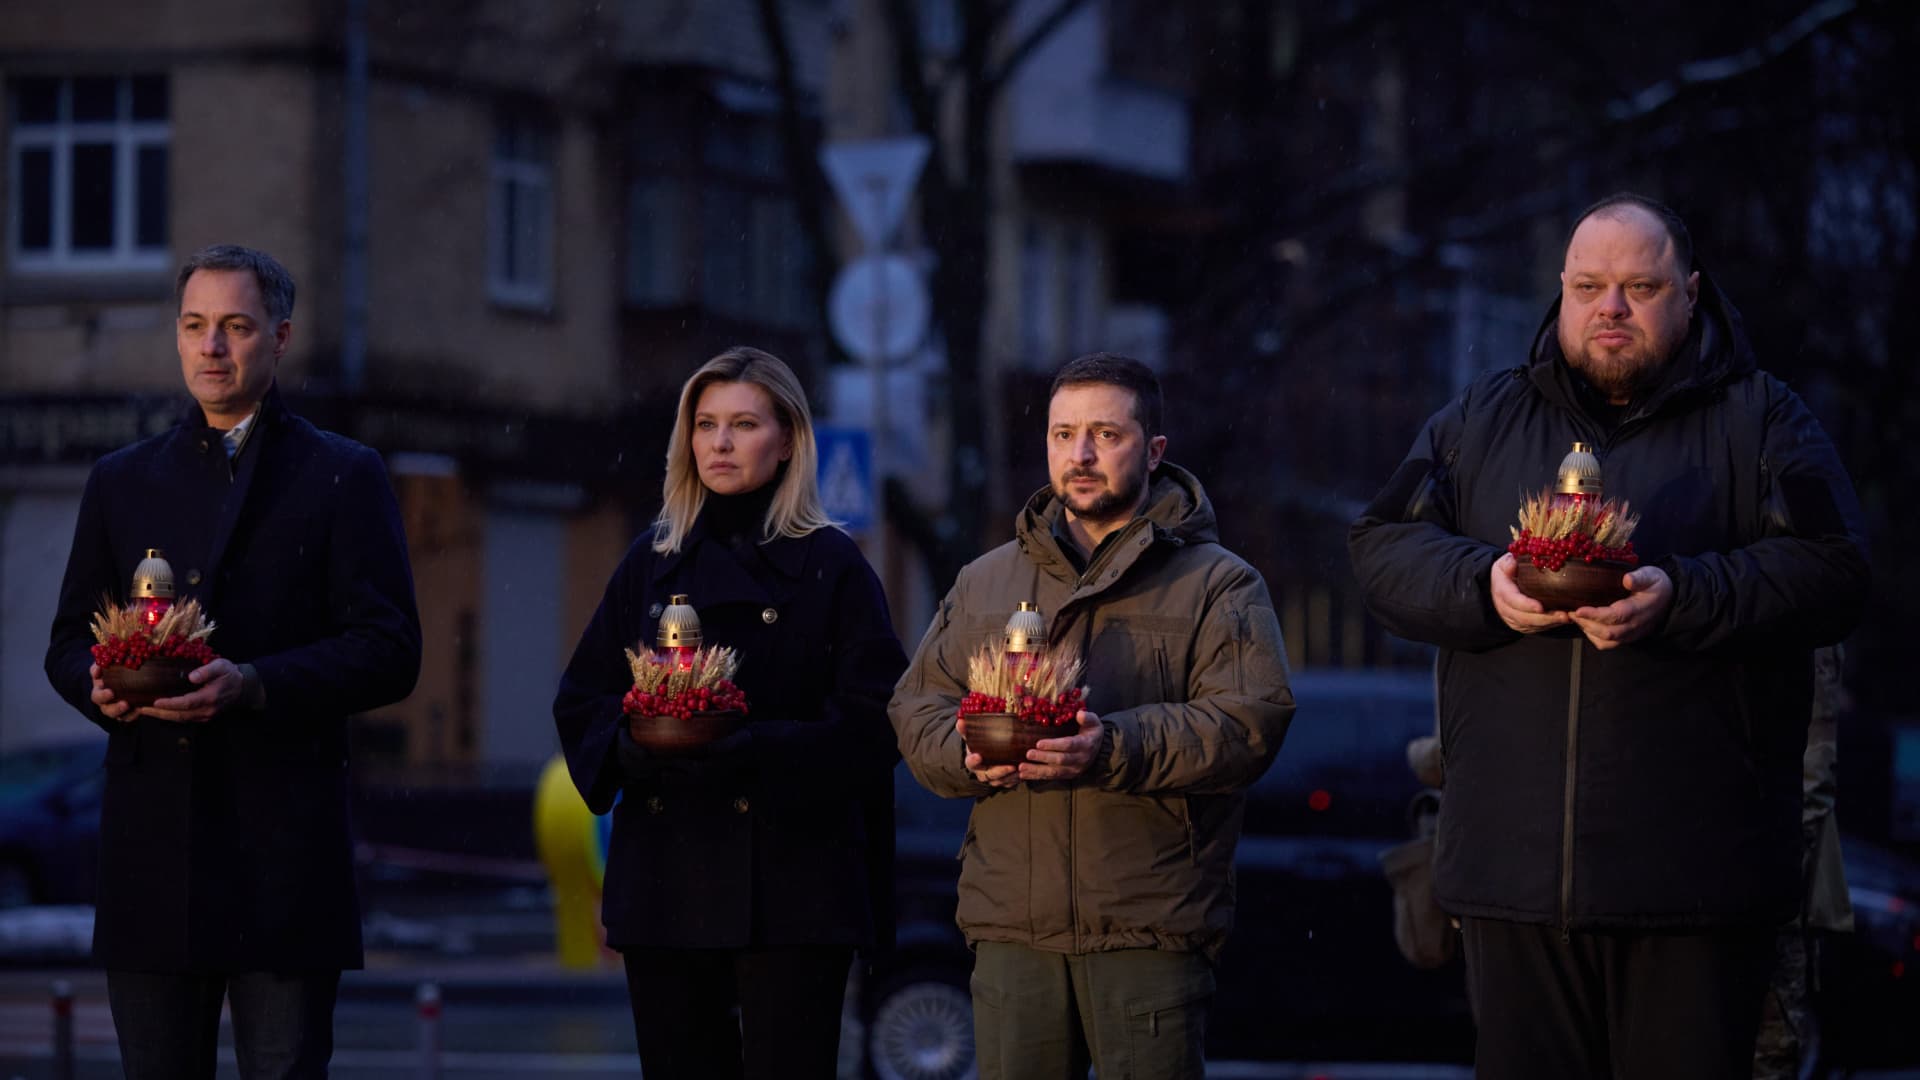 Ukrainian President, Volodymyr Zelenskyy visits Donetsk front, where the most violent clashes in the war with Russia took place in Ukraine on December 06, 2022. 